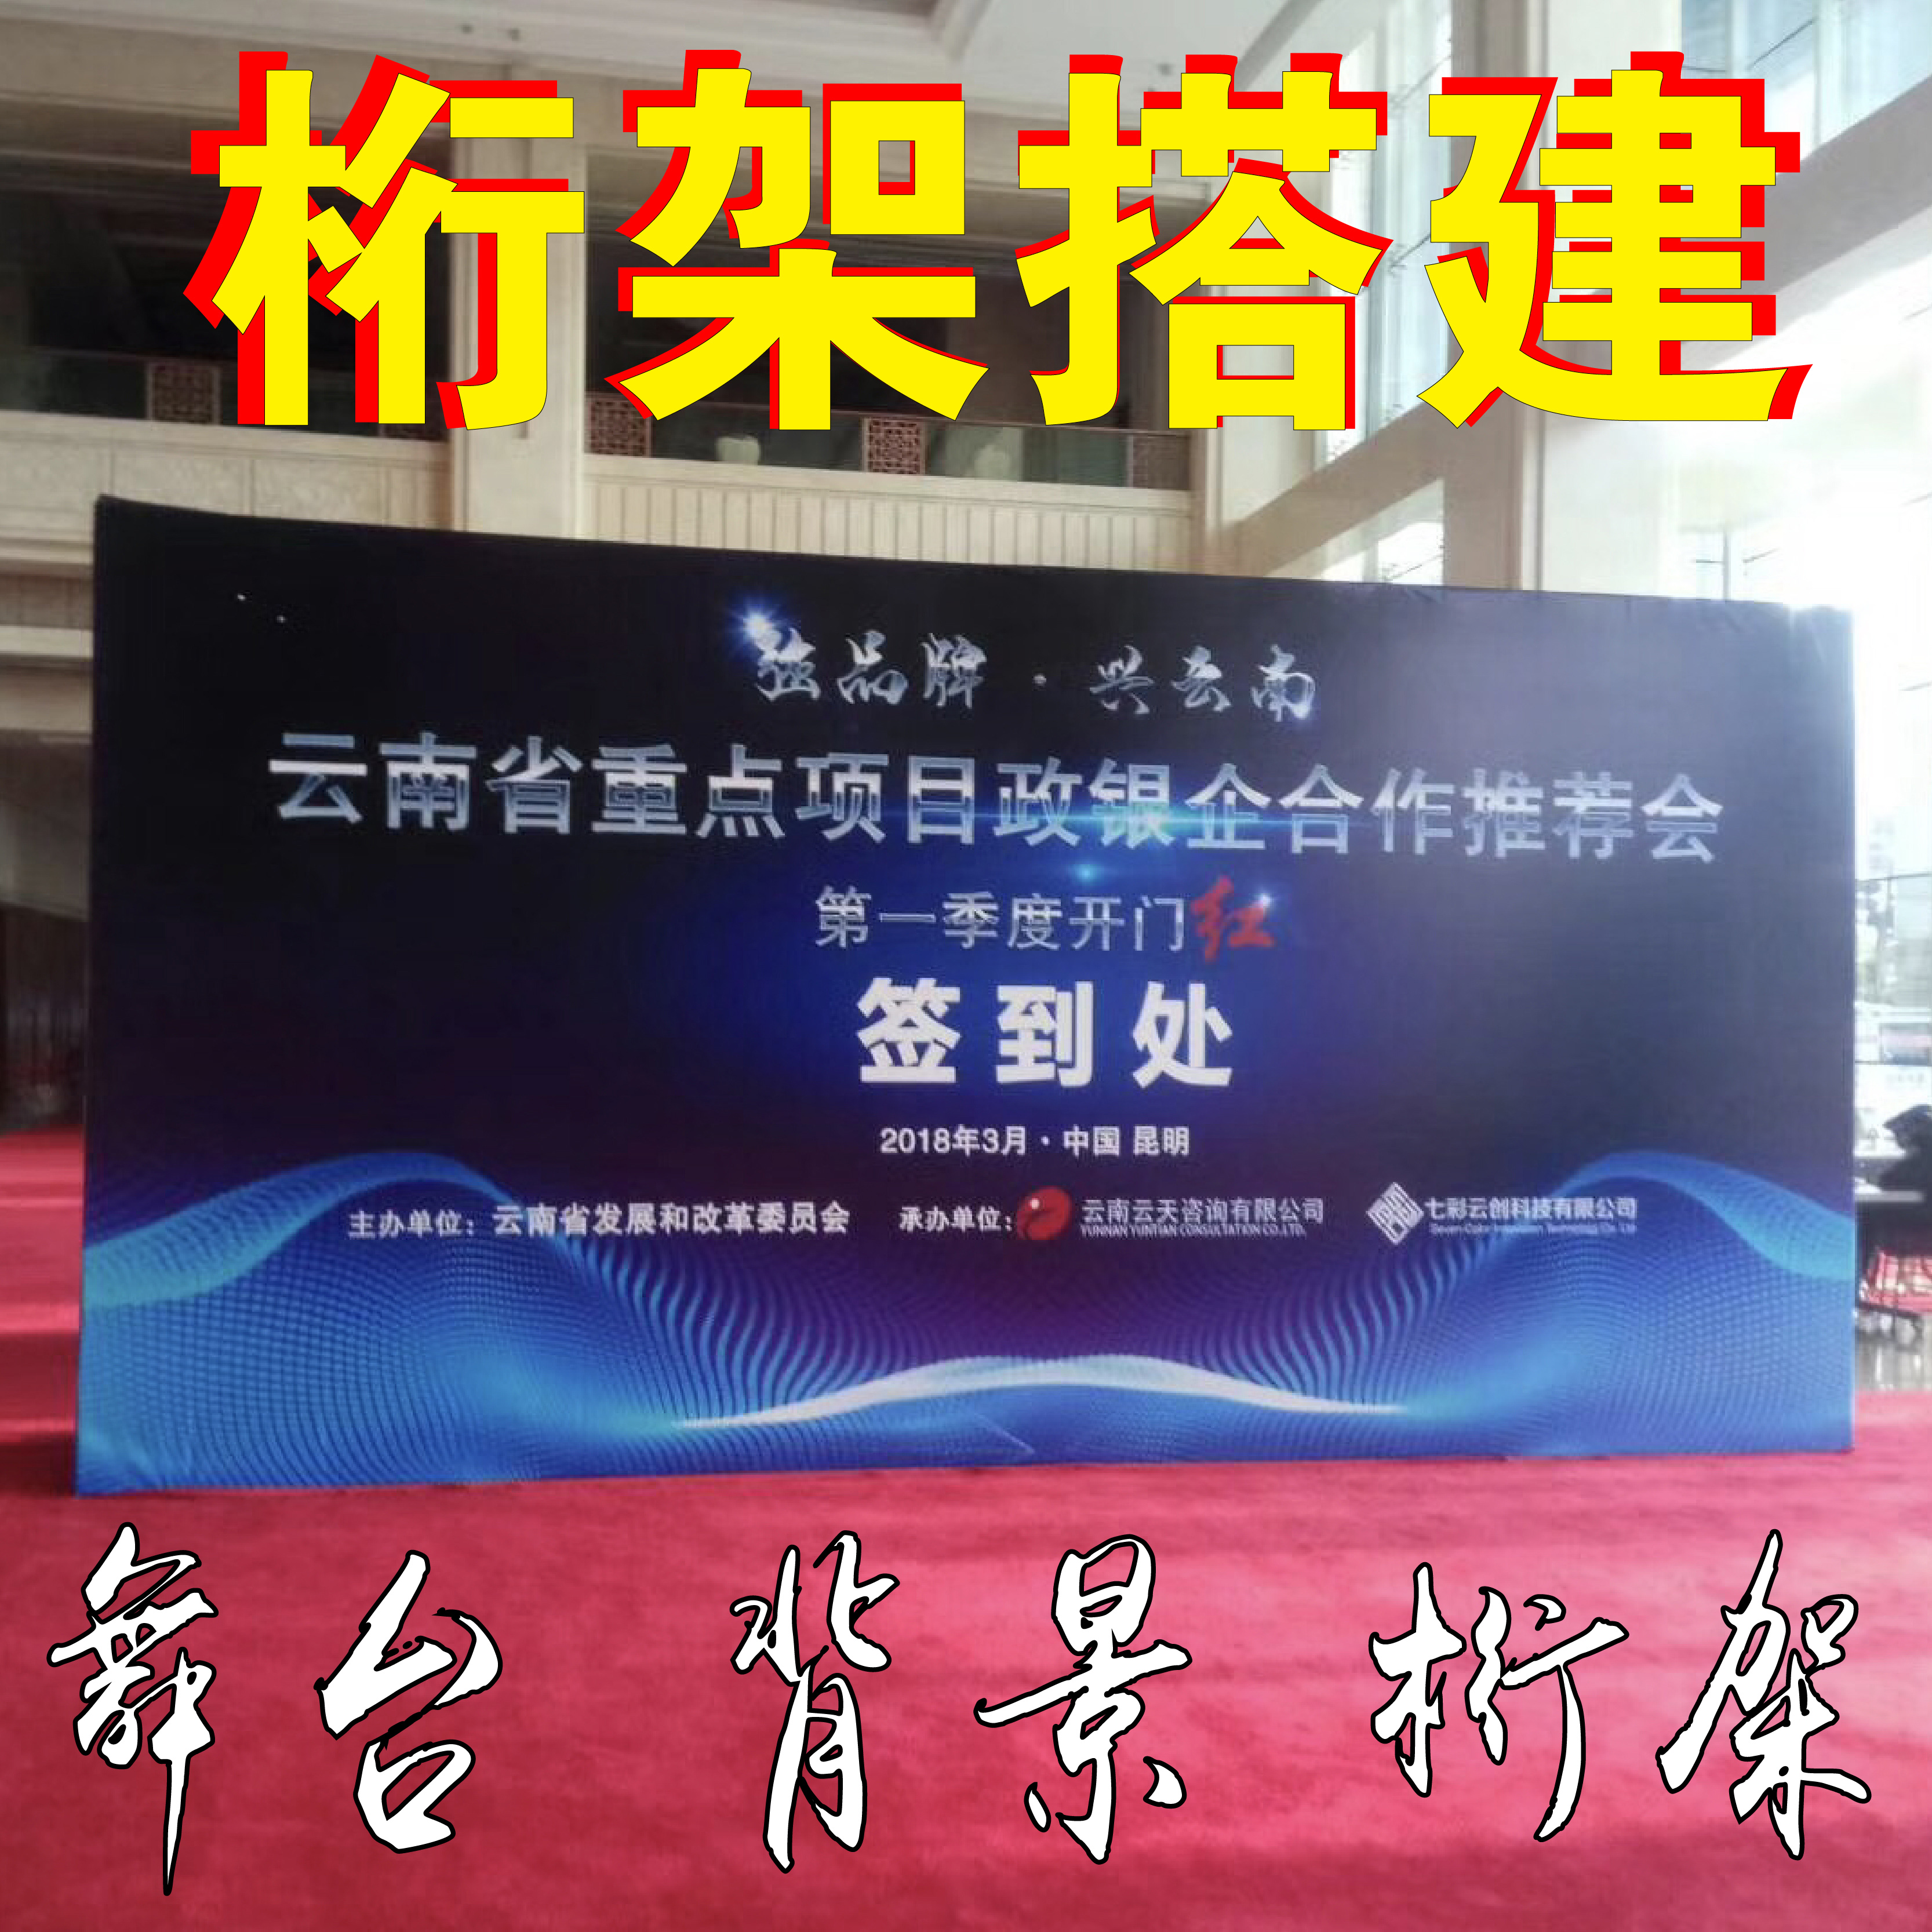 Kunming indoor and outdoor truss stage rental event conference background board signature sign-in wall construction layout